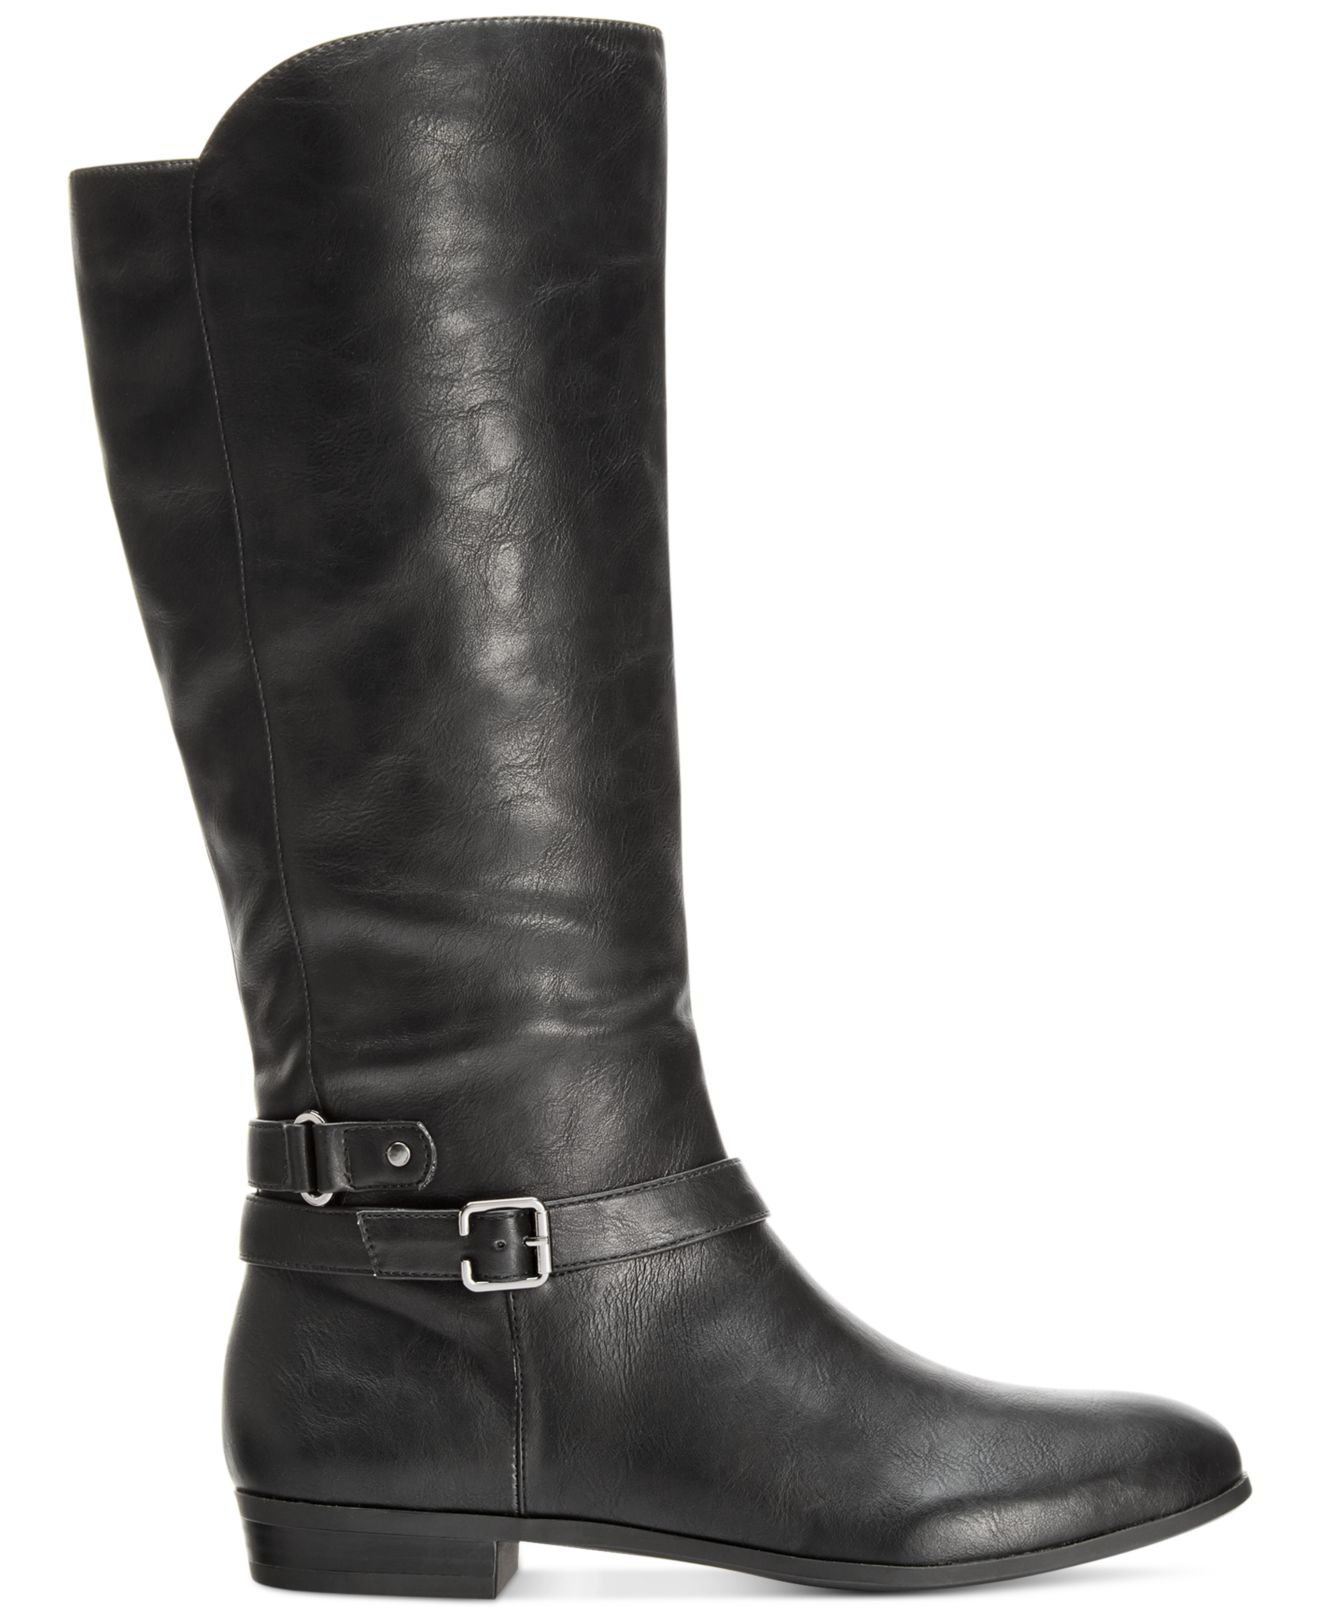 Lyst - Style & co. Style&co. Faee Wide Calf Boots, Only At Macy's in Black